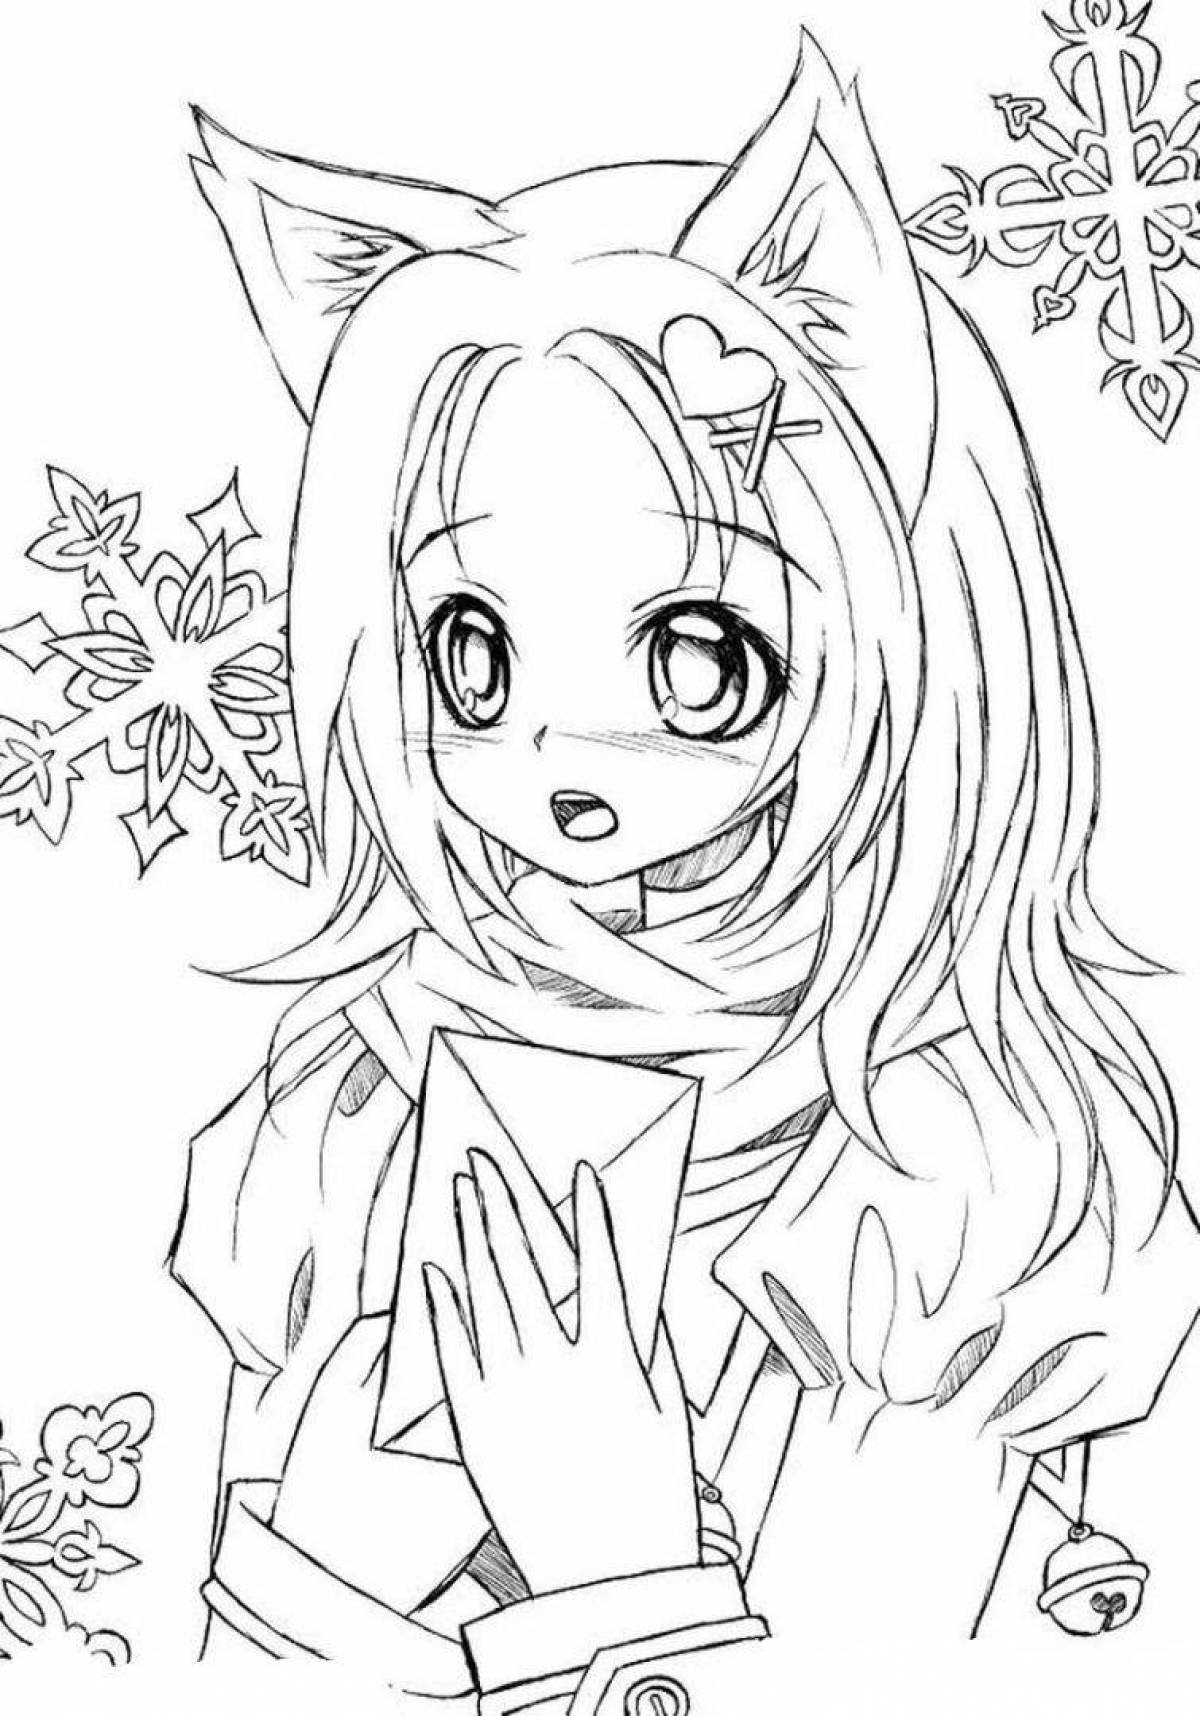 Scenic anime coloring book for girls